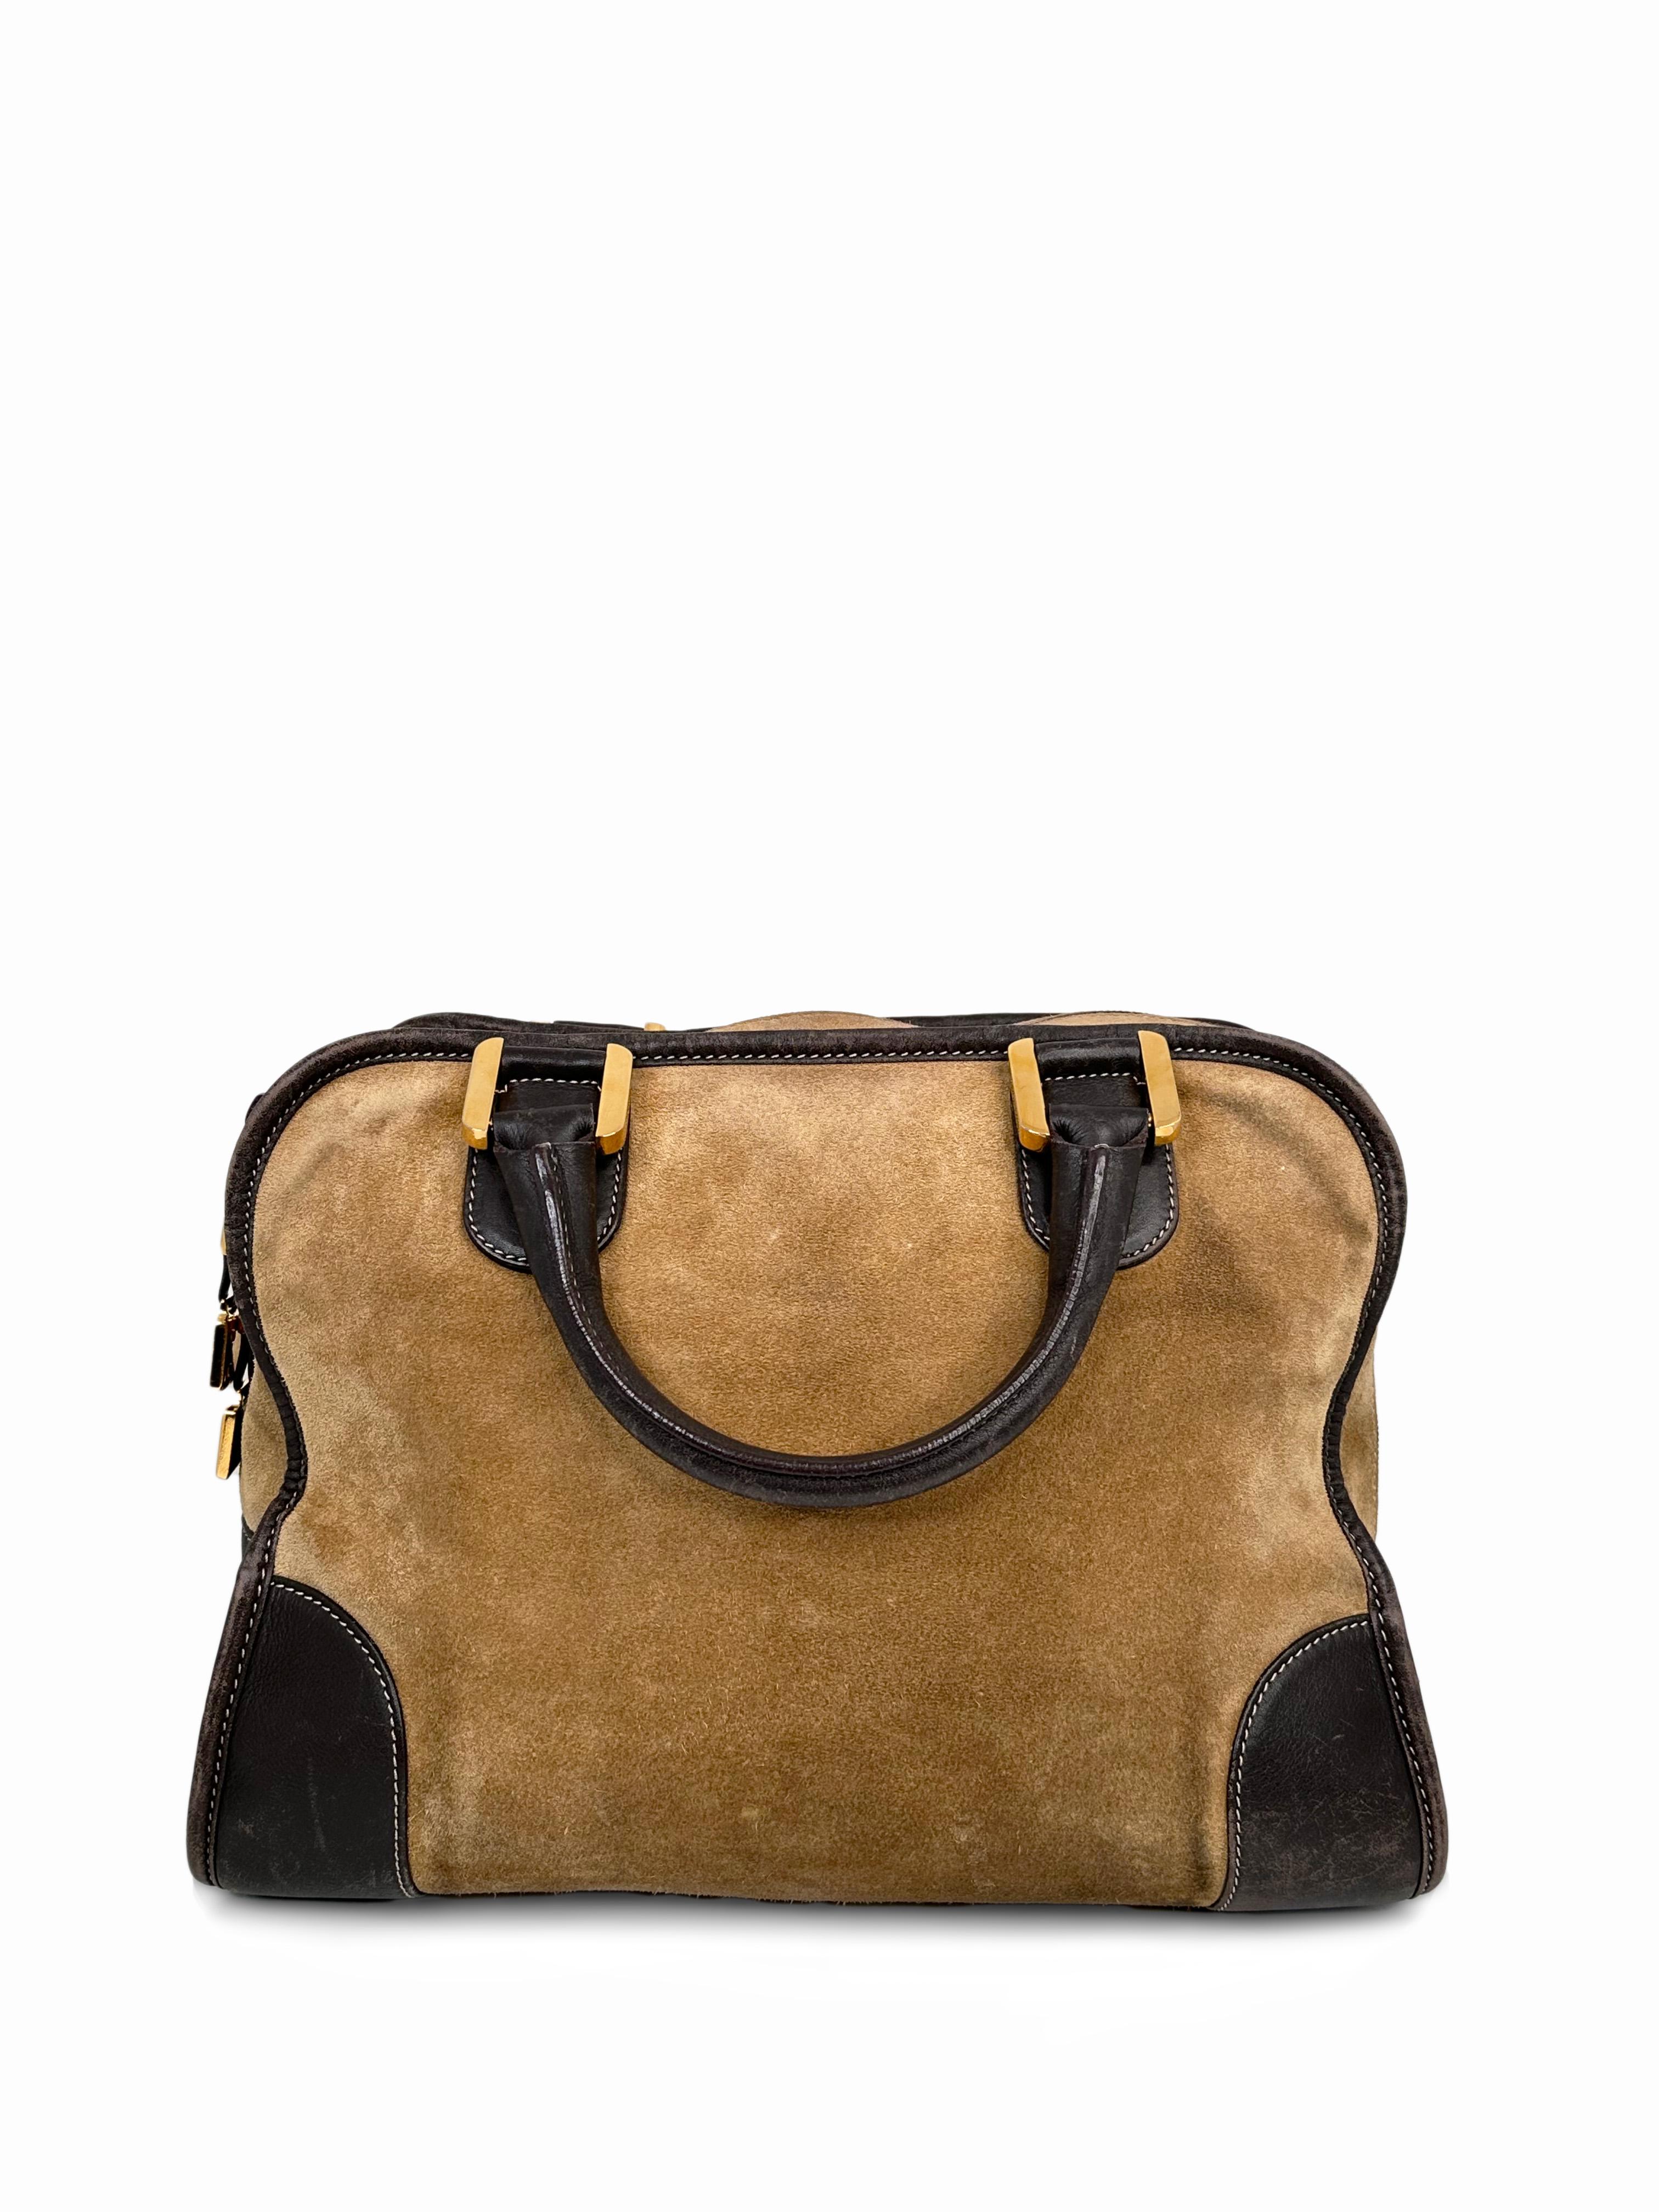 The Loewe Amazona Bag features a suede and calf leather body and rolled leather handles. The top zip closure opens to a roomy compartment featuring an interior zip pocket. It is the perfect size to carry your work and everyday essentials. This Loewe